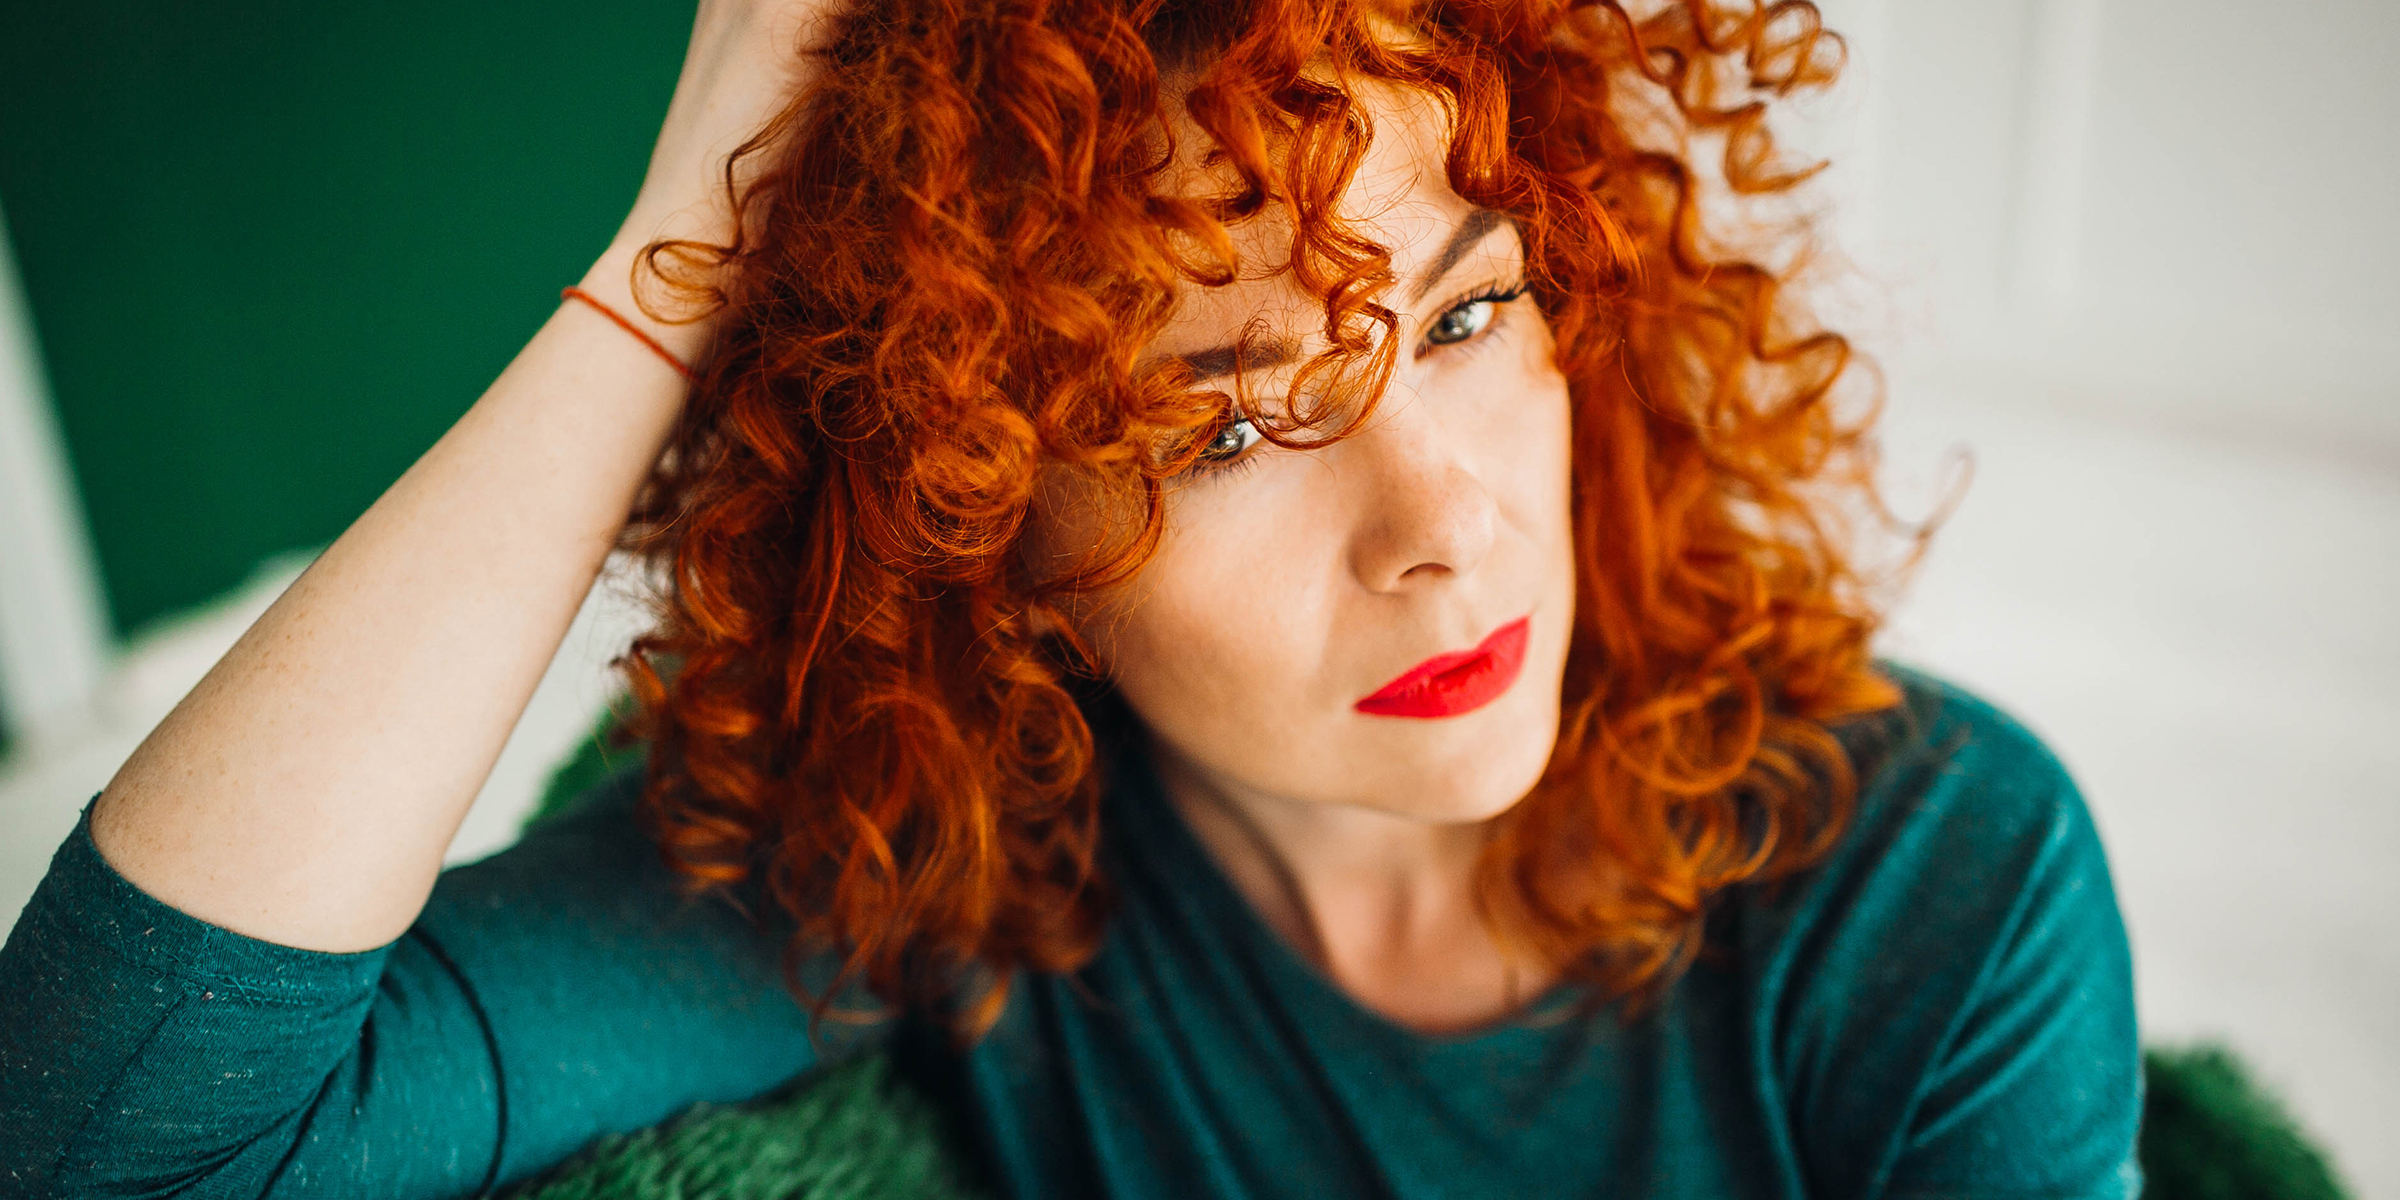 A woman with red hair and lipstick | Source: Freepik